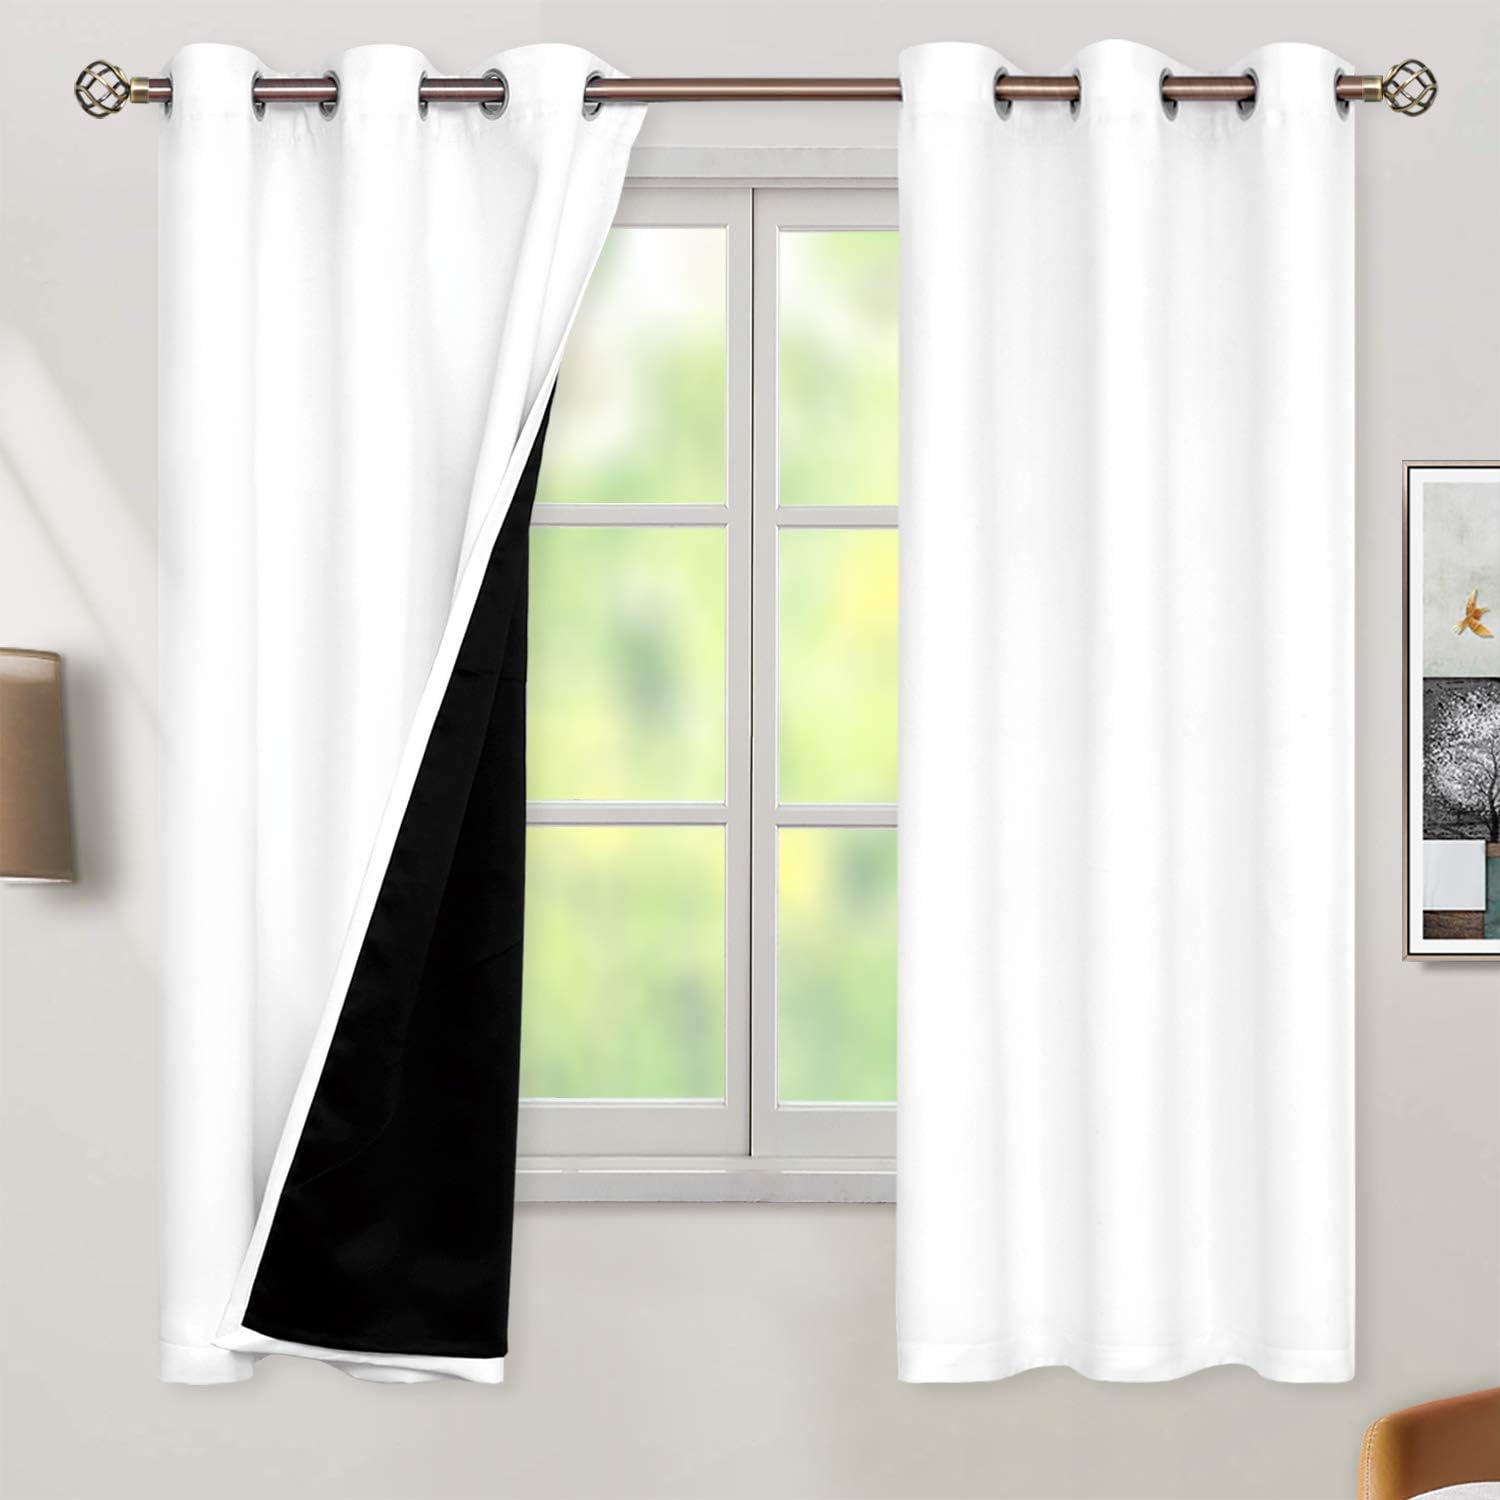 BGment Thermal Insulated 100% Blackout Curtains for [...]